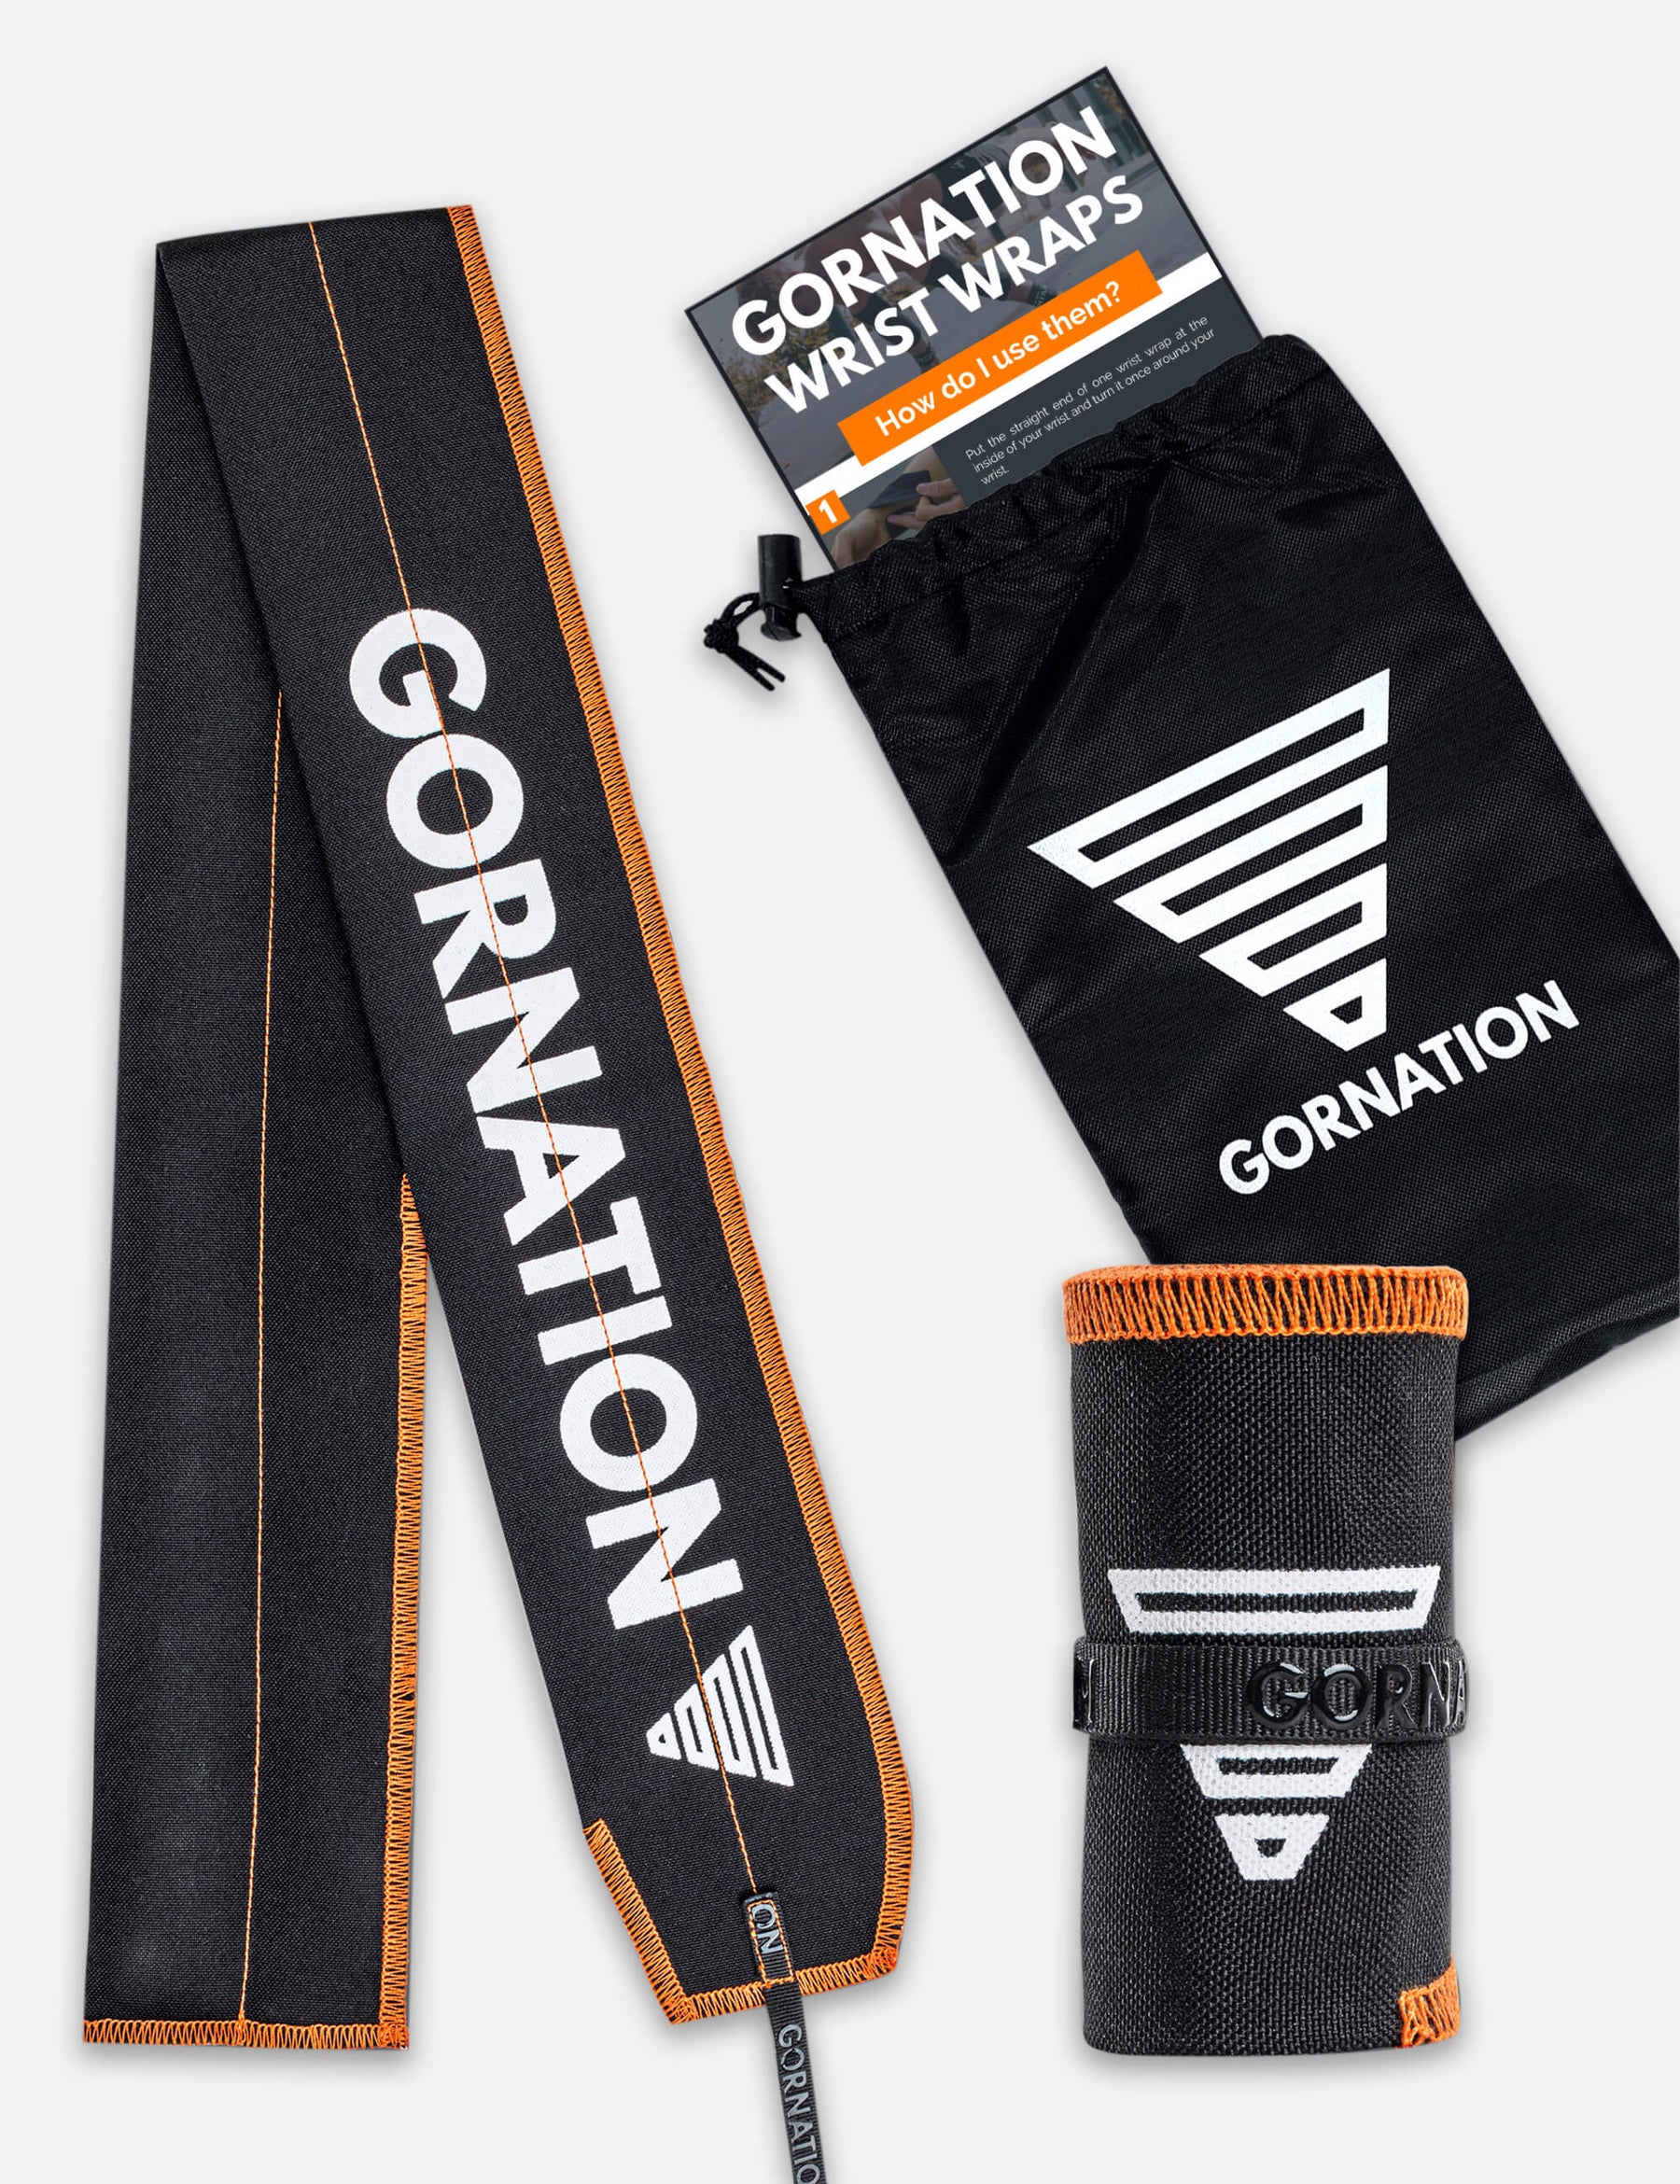 Black-orange wrist wrap from Gornation for extra stability and injury prevention. And black cary bag.